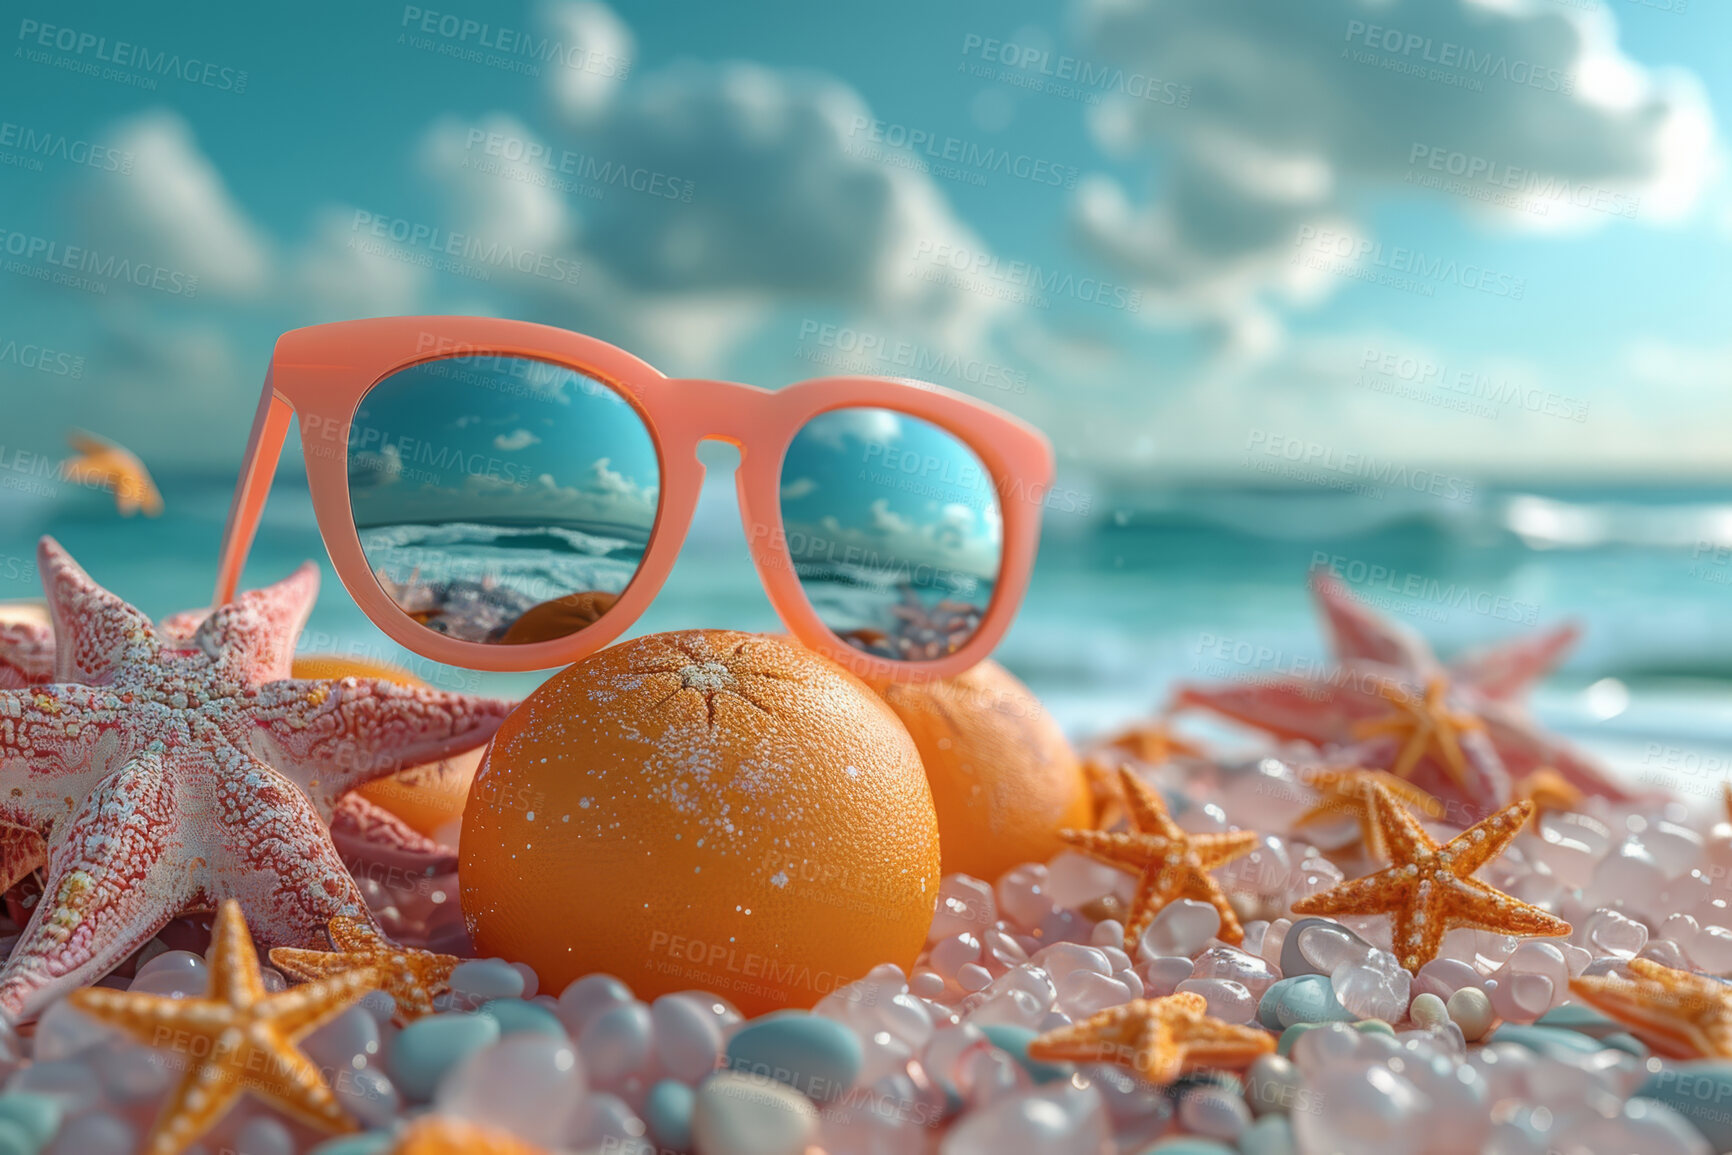 Buy stock photo Glasses, water and starfish with beach landscape or blue sky. Tropical paradise, dream holiday or island vacation. Background, summer wallpaper and relaxation in nature, sun and blue sea waves